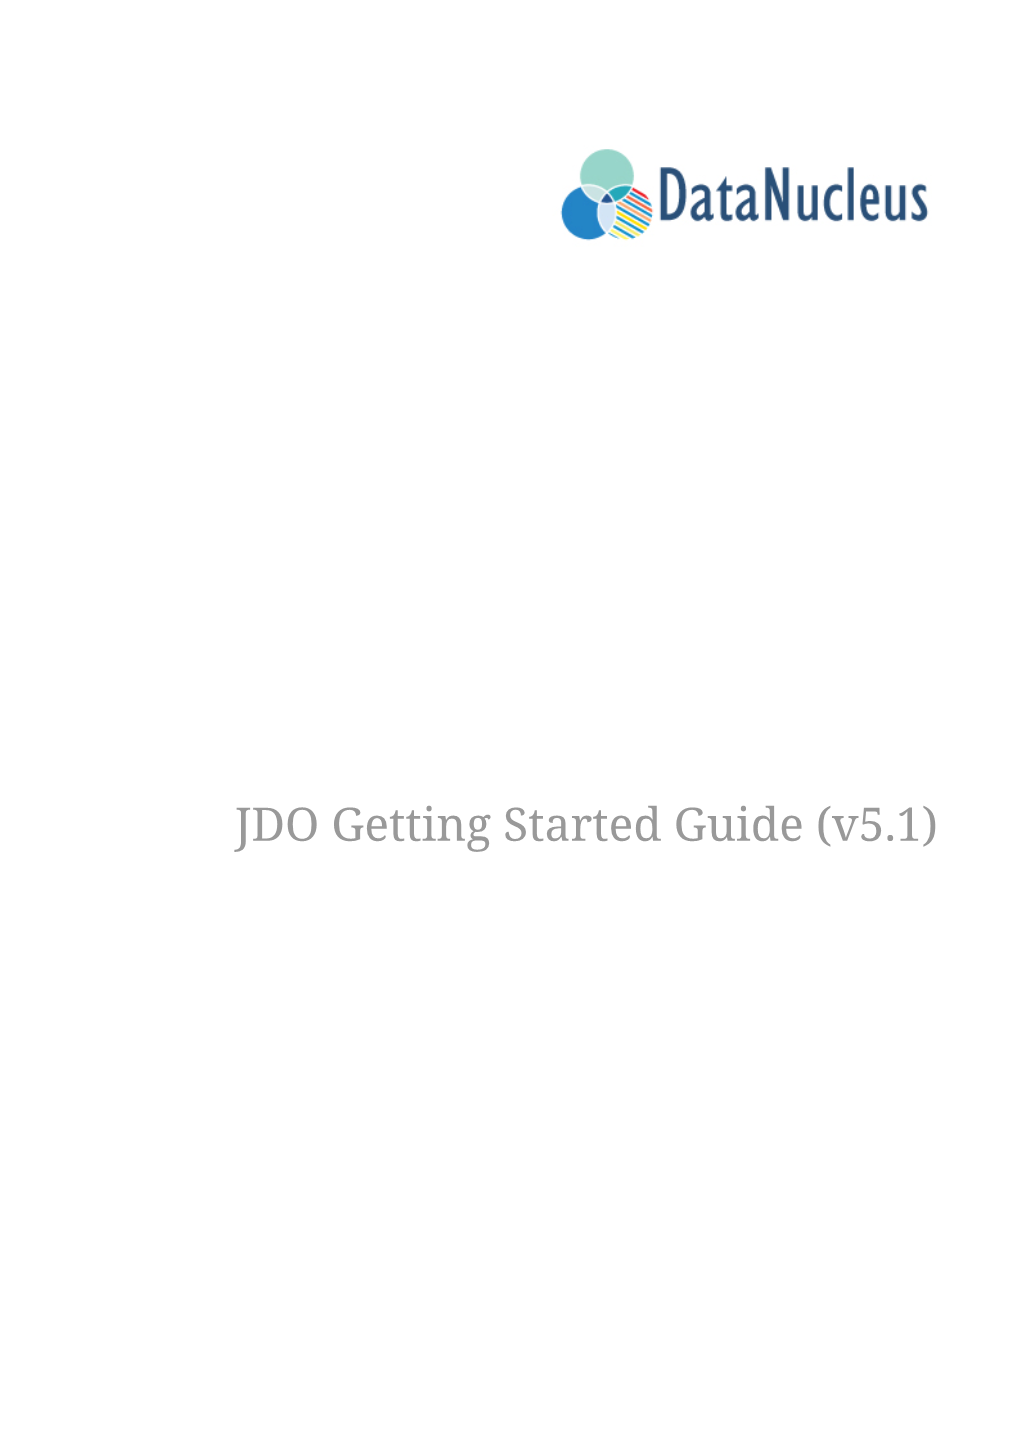 JDO Getting Started Guide (V5.1) Table of Contents